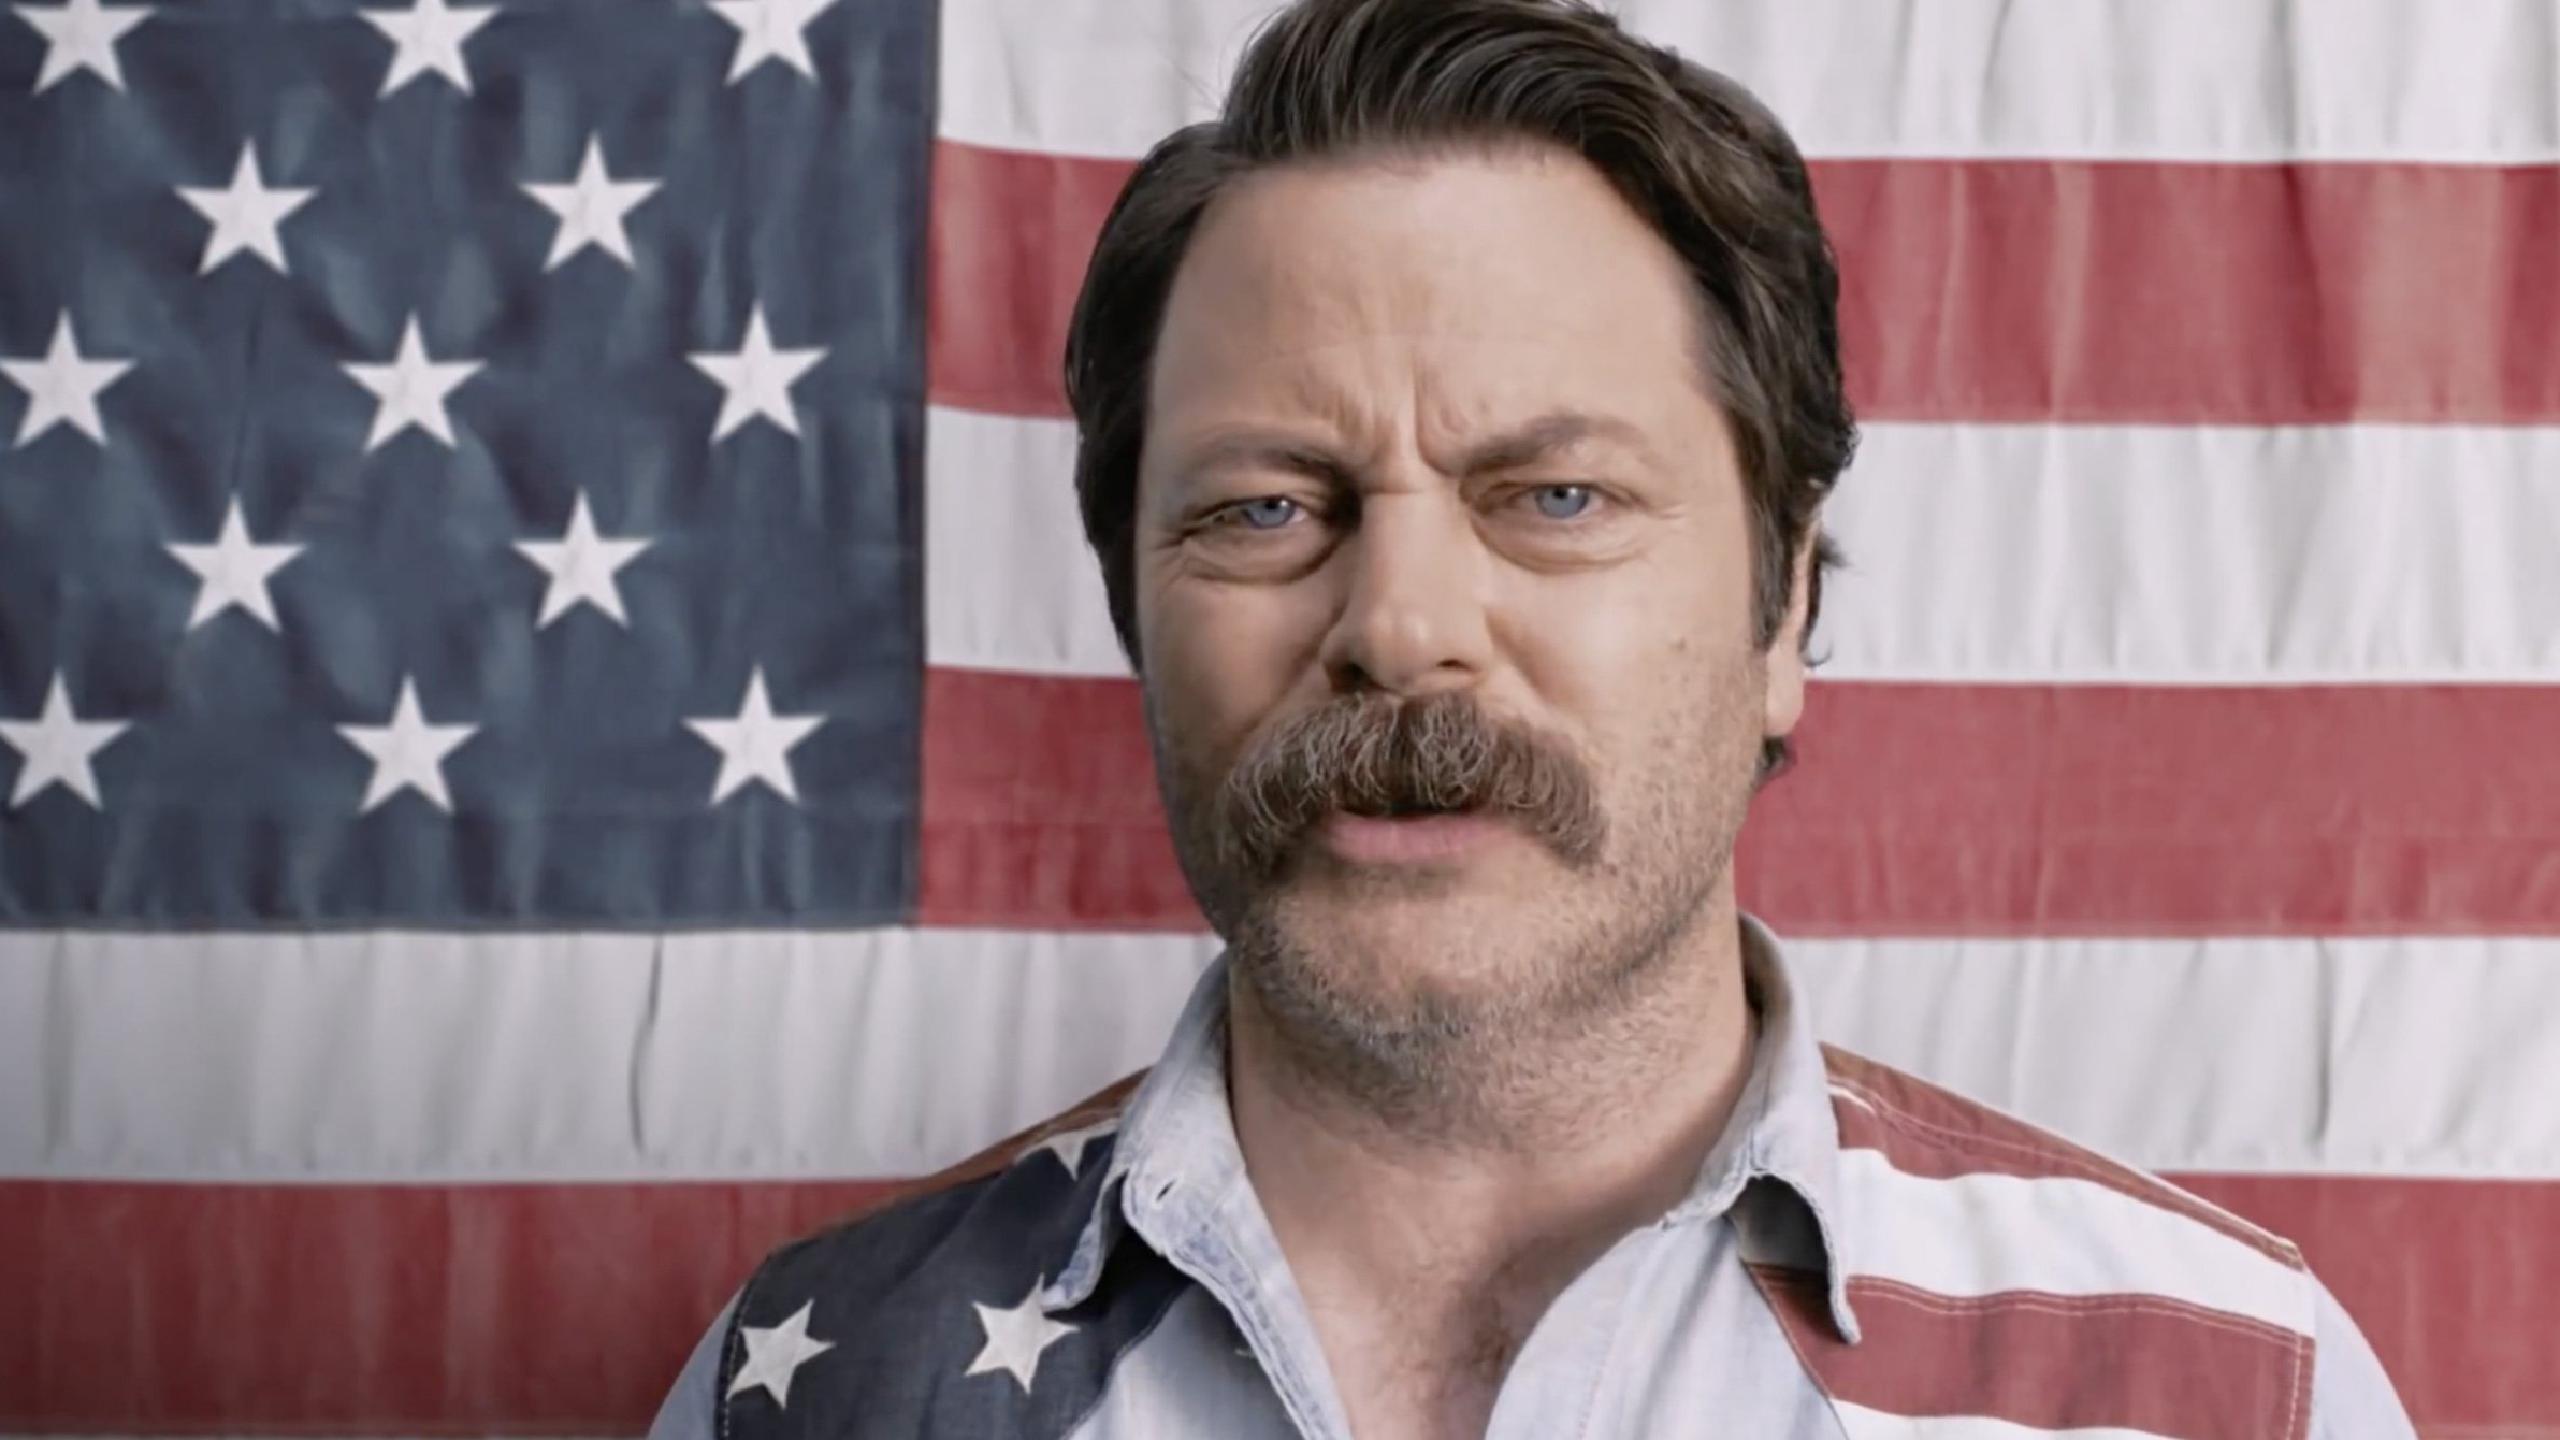 Nick Offerman tour dates 2022 2023. Nick Offerman tickets and concerts